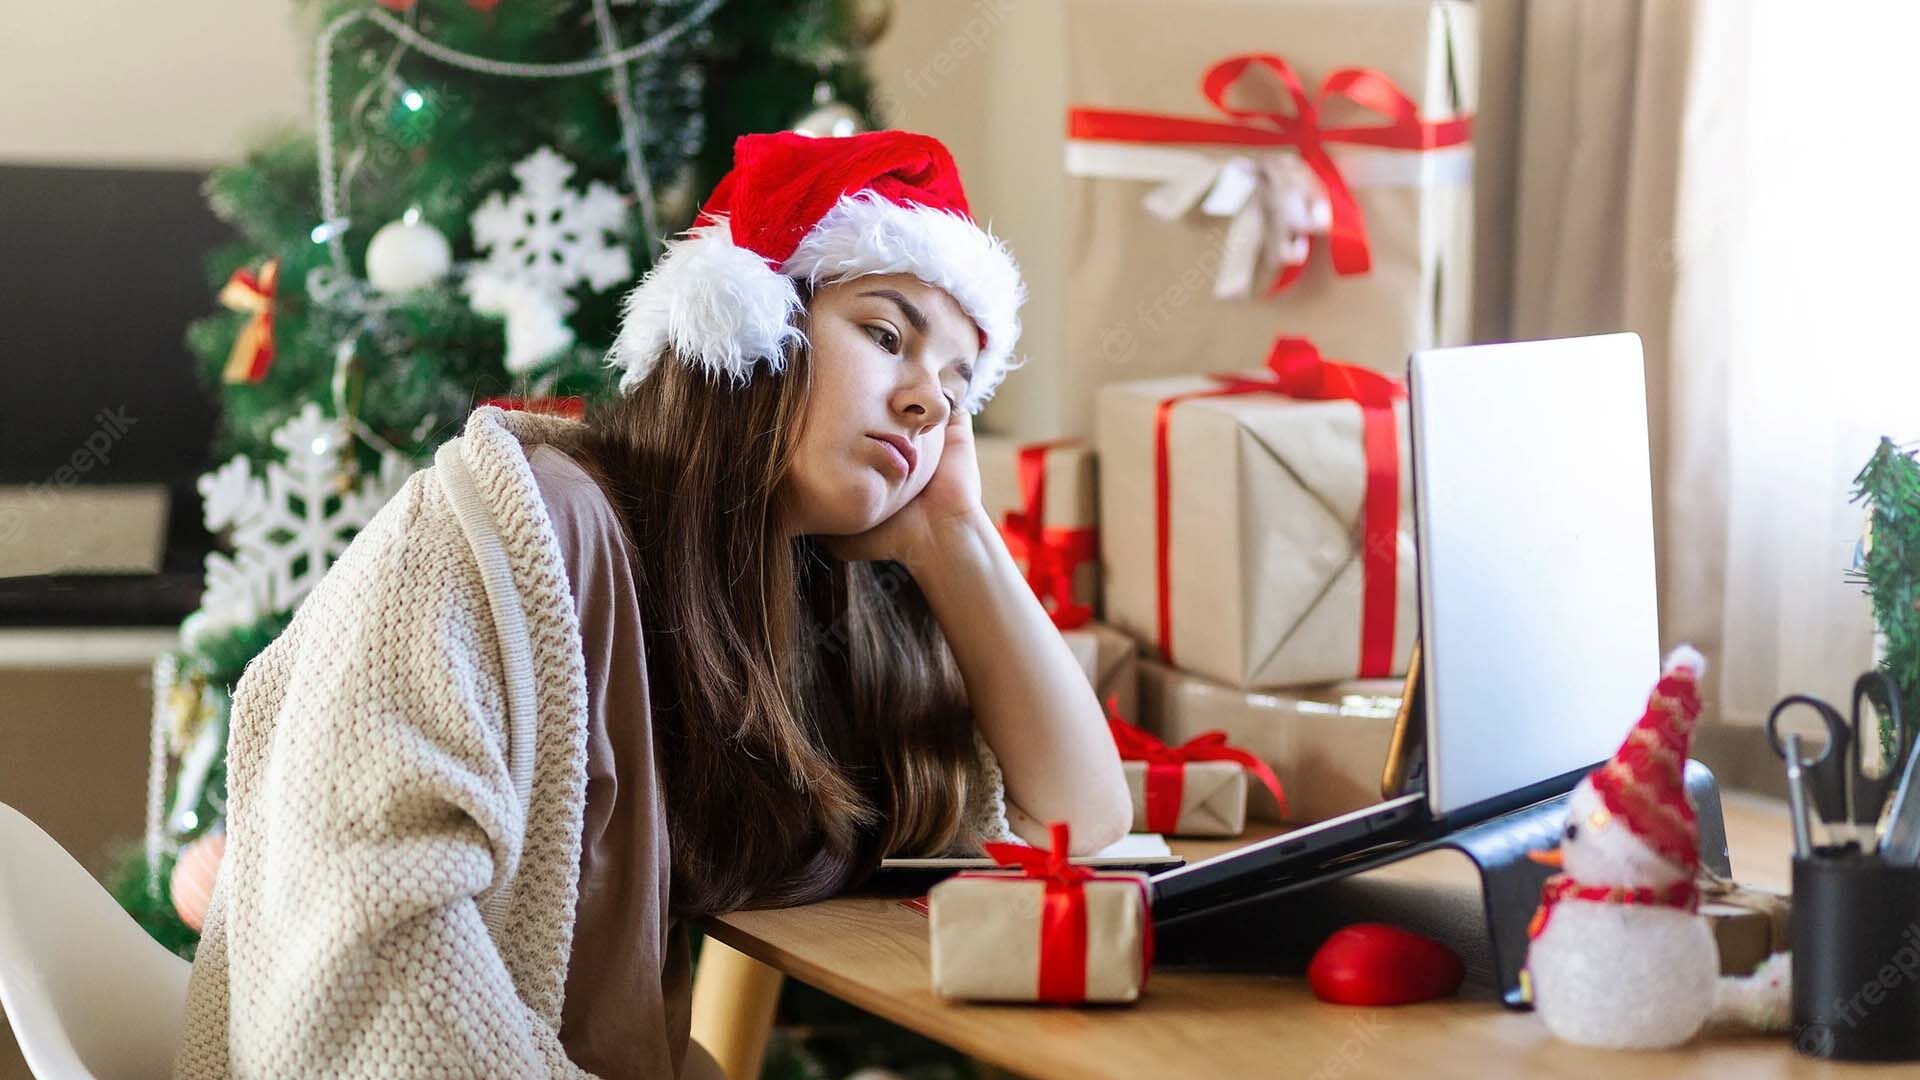 PixoLabo - Critical eCommerce Mistakes to Avoid Before Christmas